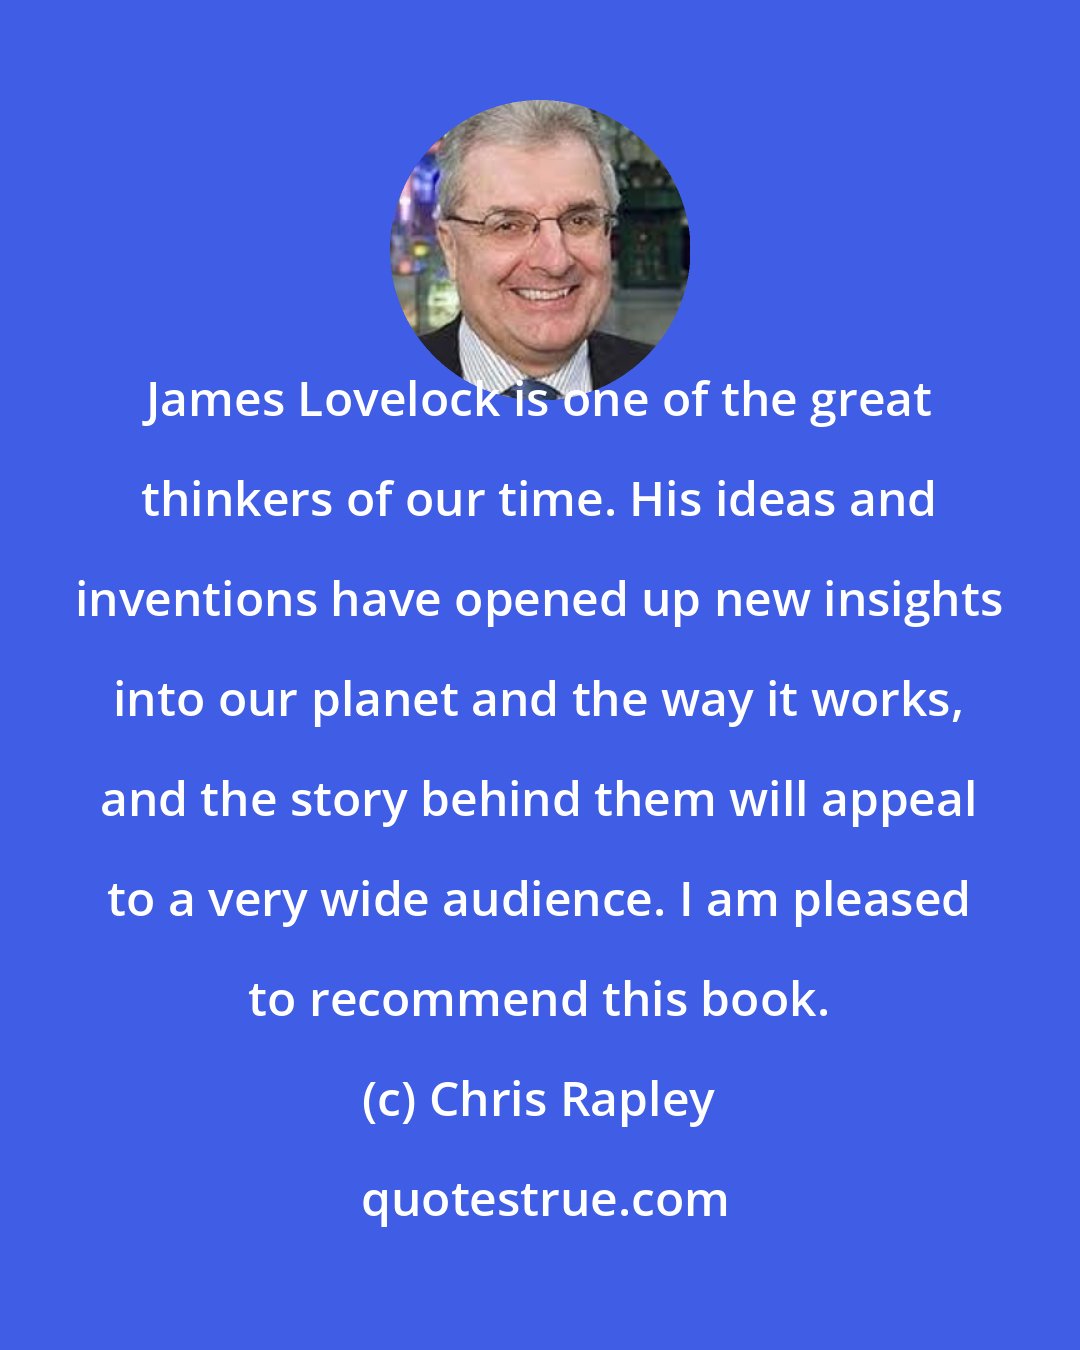 Chris Rapley: James Lovelock is one of the great thinkers of our time. His ideas and inventions have opened up new insights into our planet and the way it works, and the story behind them will appeal to a very wide audience. I am pleased to recommend this book.